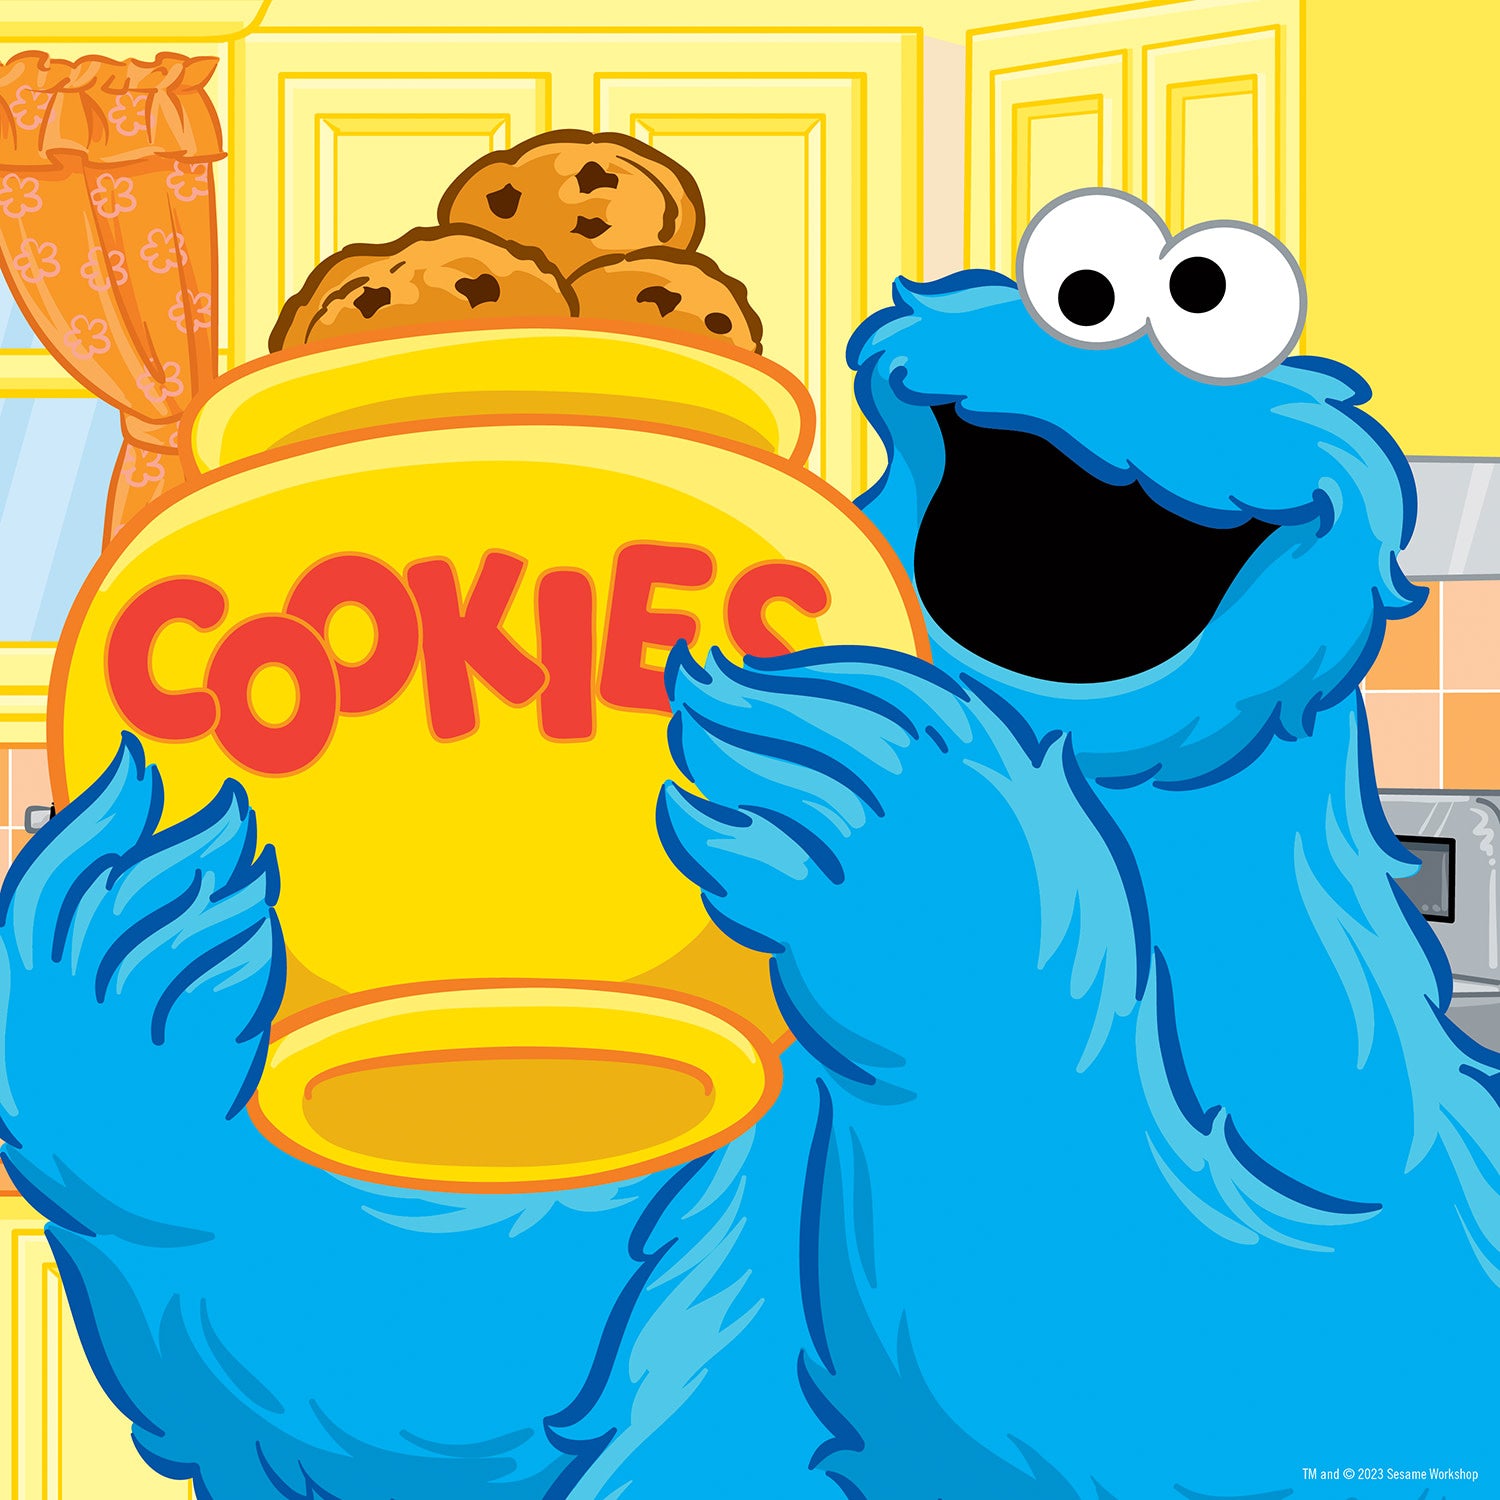 Sesame Street - Cookie Monster 25 Piece Square Puzzle